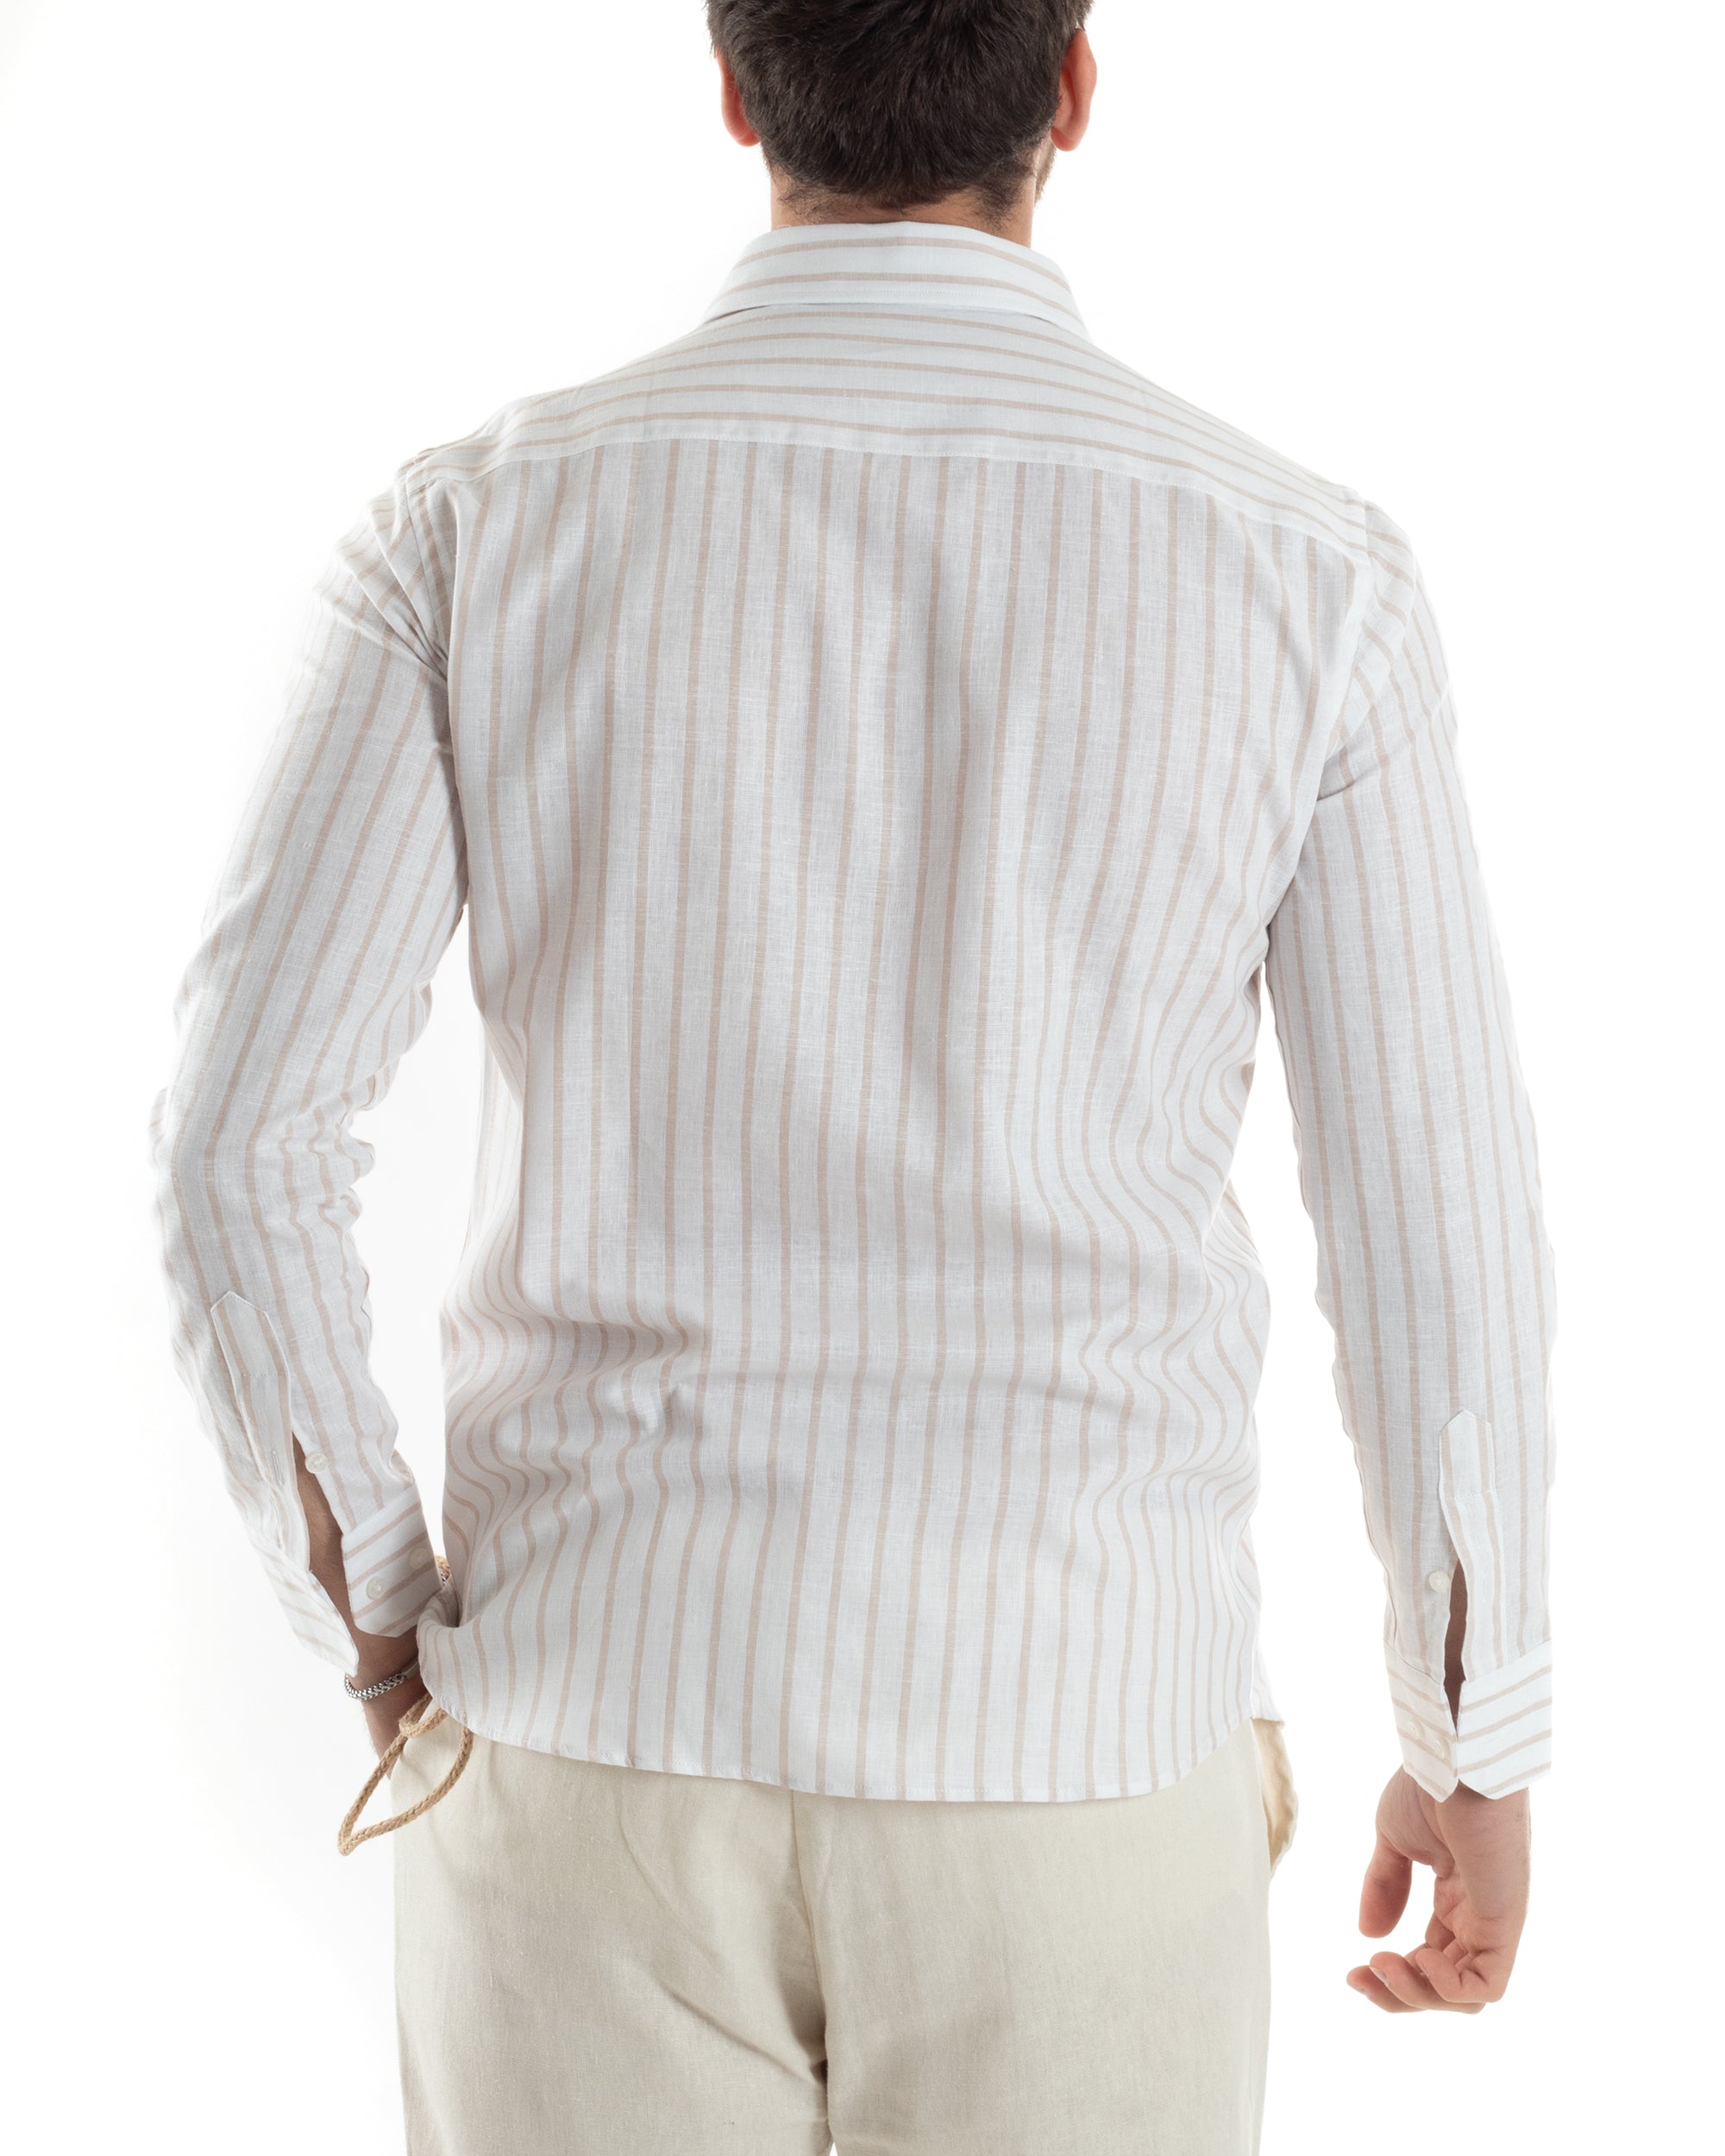 Men's Shirt With French Collar Long Sleeve Linen Narrow Stripe Casual Beige GIOSAL-C2750A